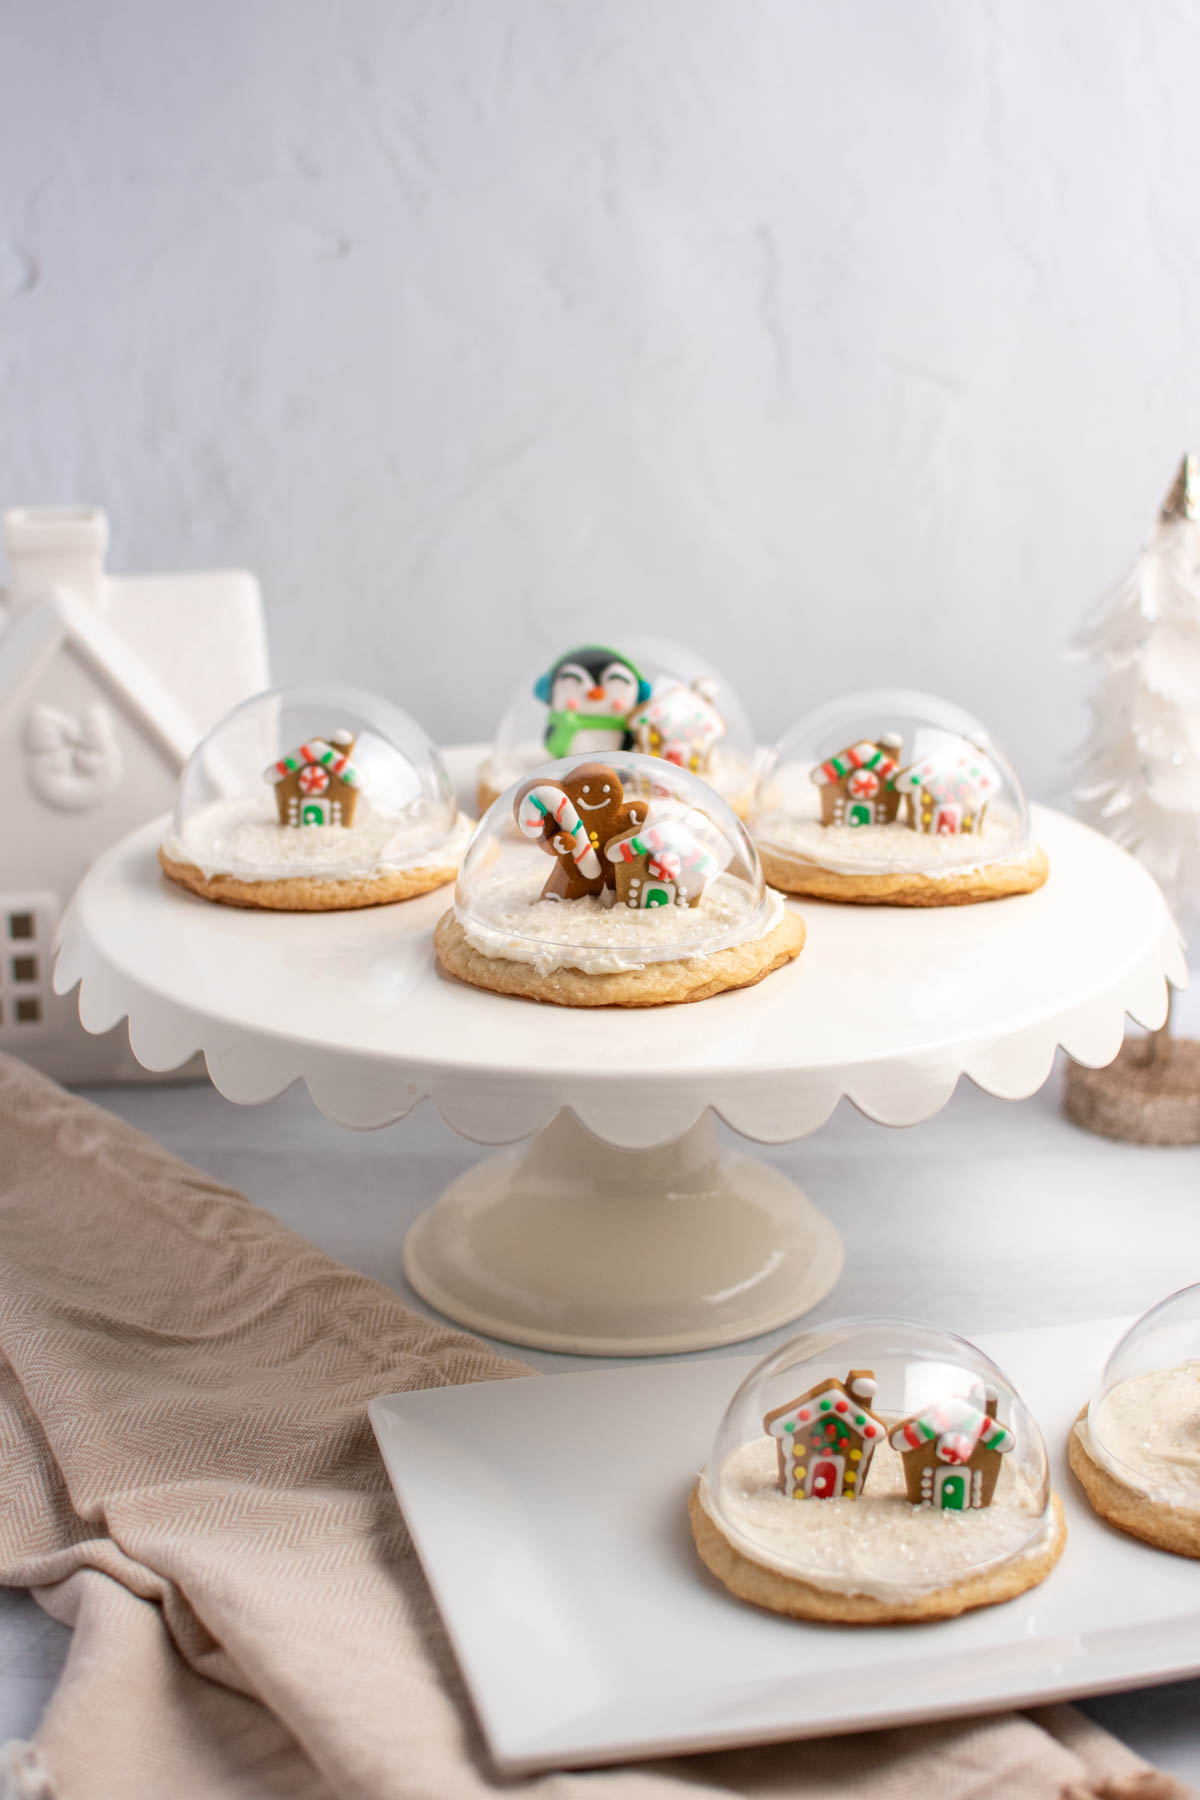 Snow globe sugar cookies with frosting decorations on white cake stand and white platter.